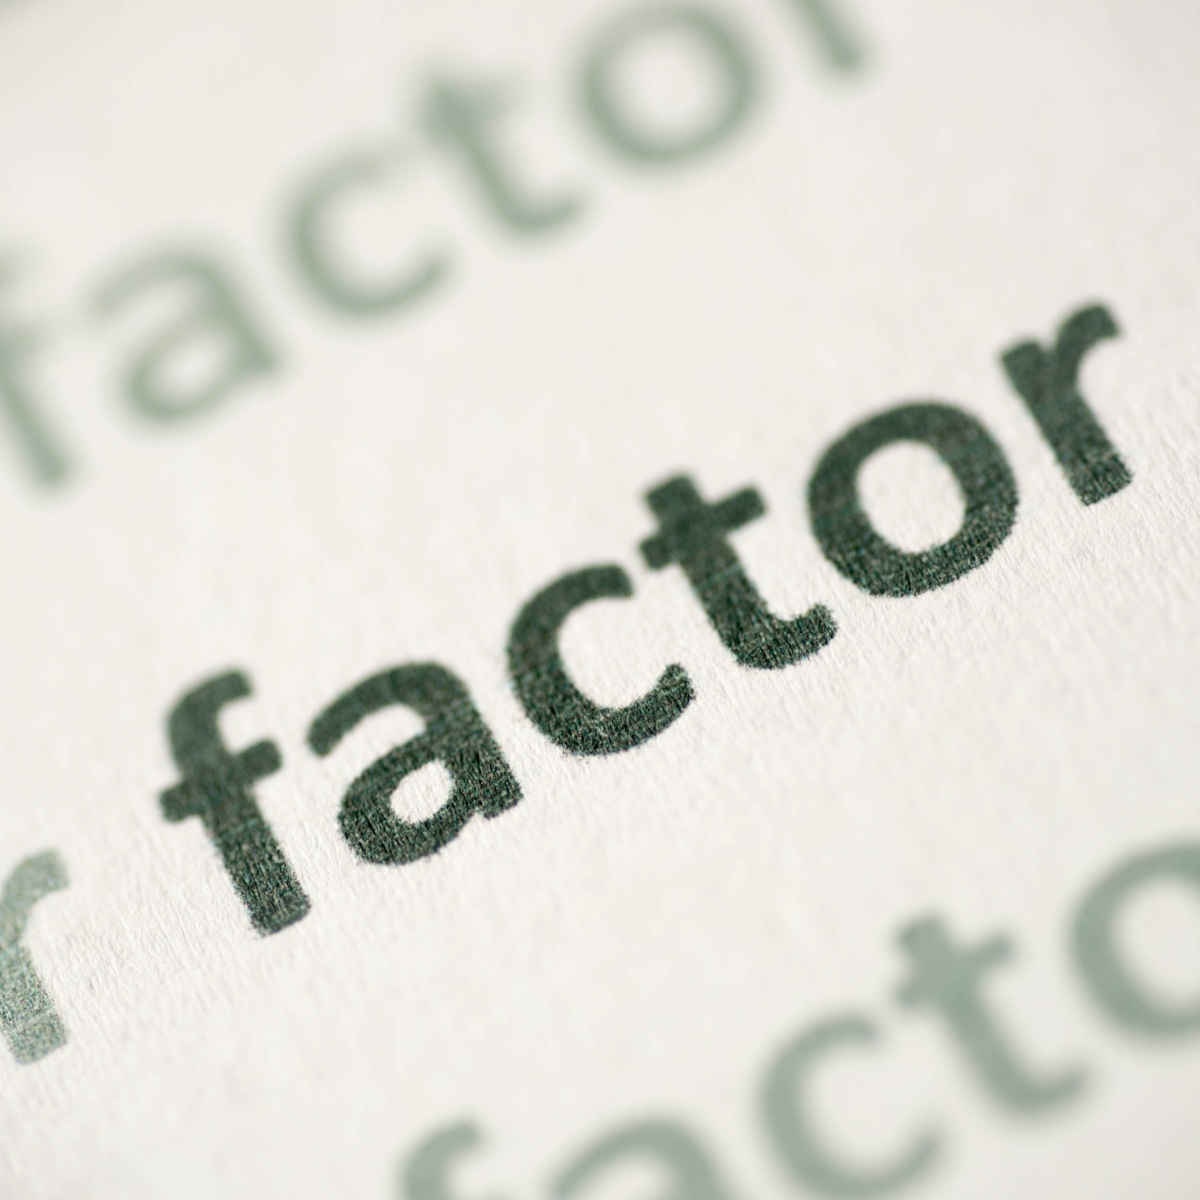 Photo of the word factor on a printed page zoomed in close up